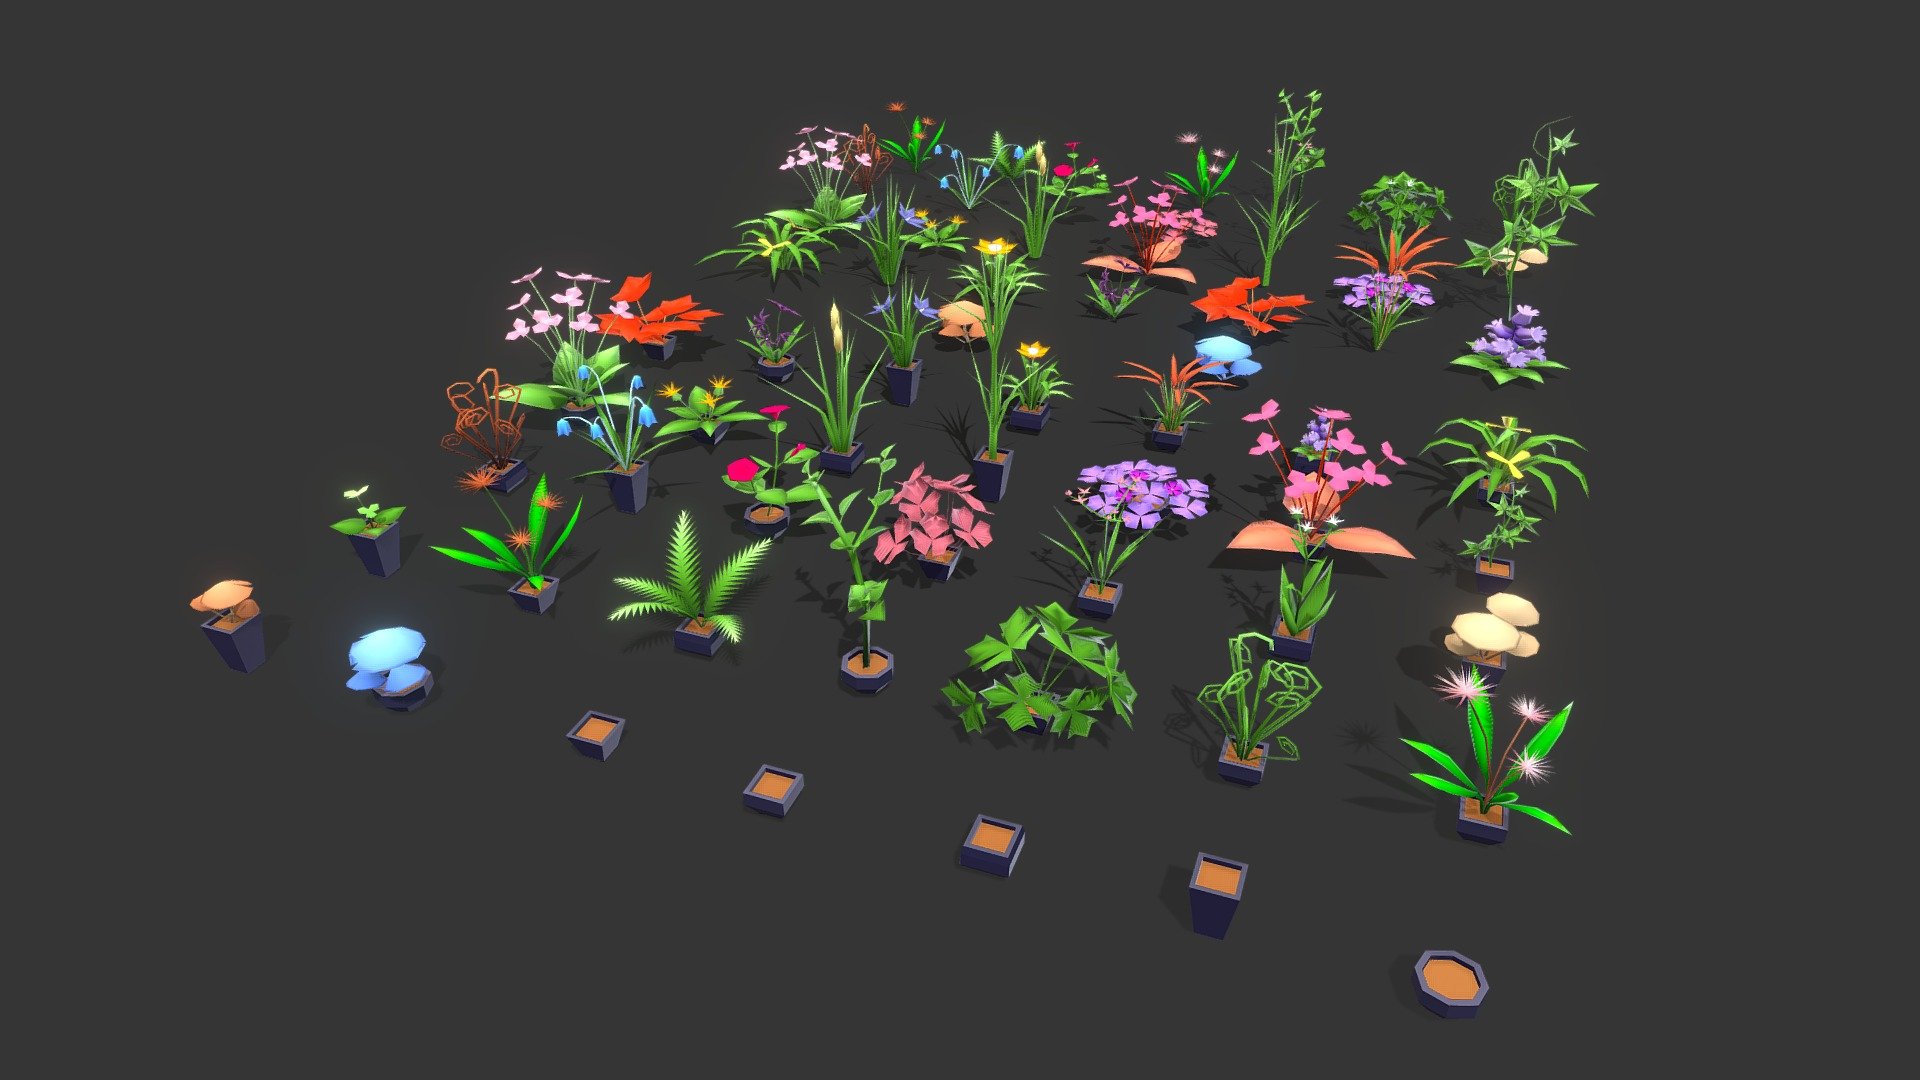 Good day, i hope you will like this plant and flower pack made in blender.
This Pack contains
 -30 plants and flowers
 -30 plants and flowers with pots
 -5 pots
Game ready

Checkout my other low poly packs:

Flower Pack: https://sketchfab.com/3d-models/stylize-low-poly-flowers-pack-dc6474e66ec4493ea55af5332638fdd9

Tree Pack: https://sketchfab.com/3d-models/stylize-low-poly-trees-pack-3ccc978e370b42e5a3f4af85c1f05f7b - Stylize Low Poly Plants and Flowers Pack - Buy Royalty Free 3D model by LowPolyBoy 3d model